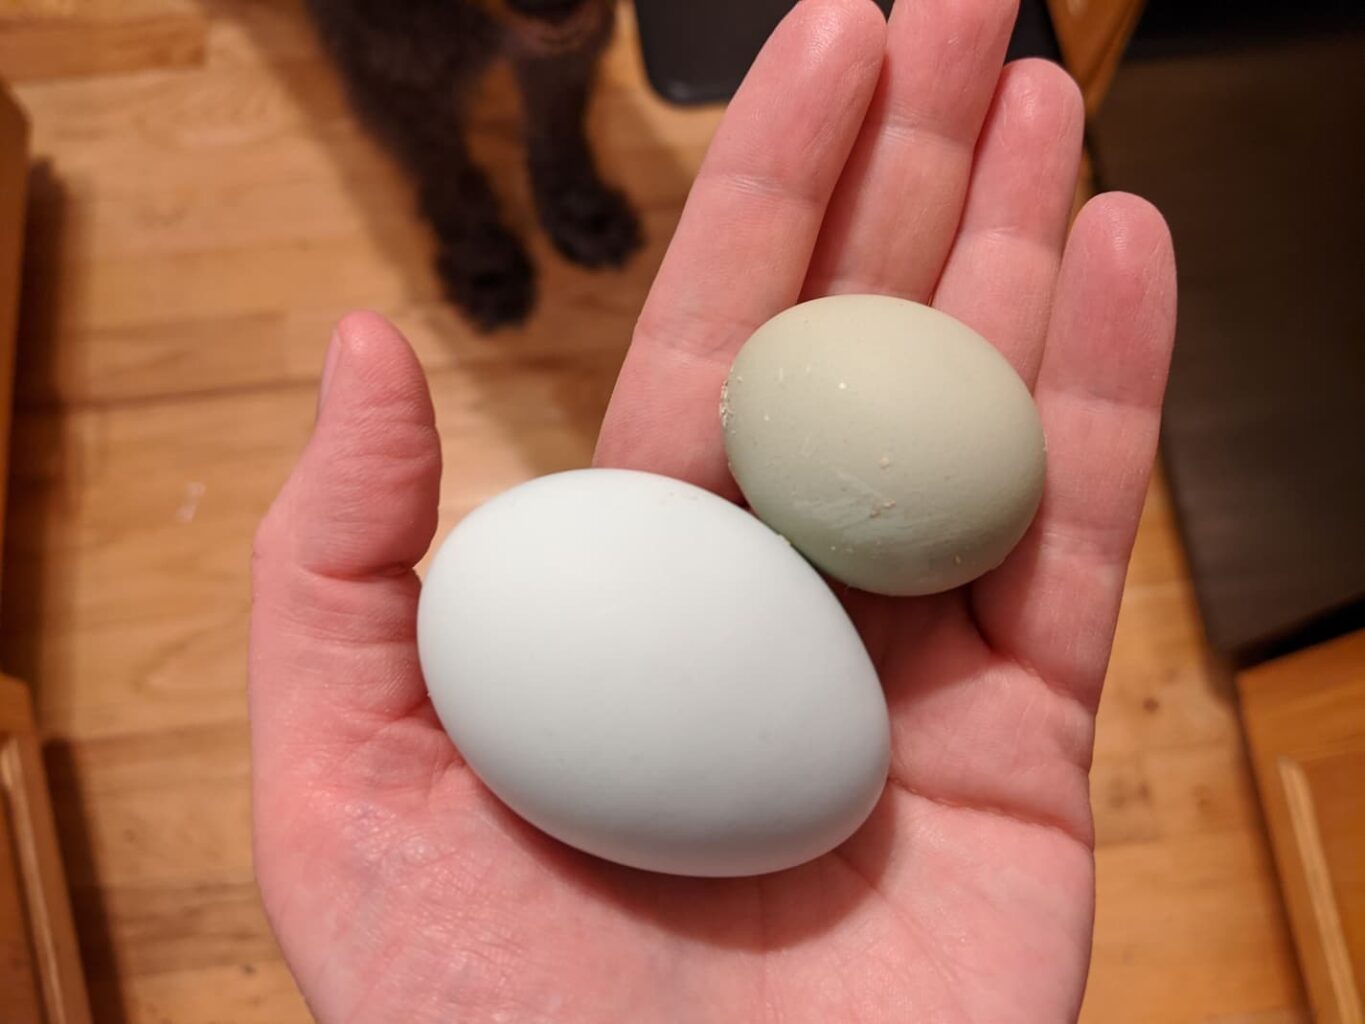 An image of a regular-sized next to a pullet egg in the palm of Kimberly Starr's hand.